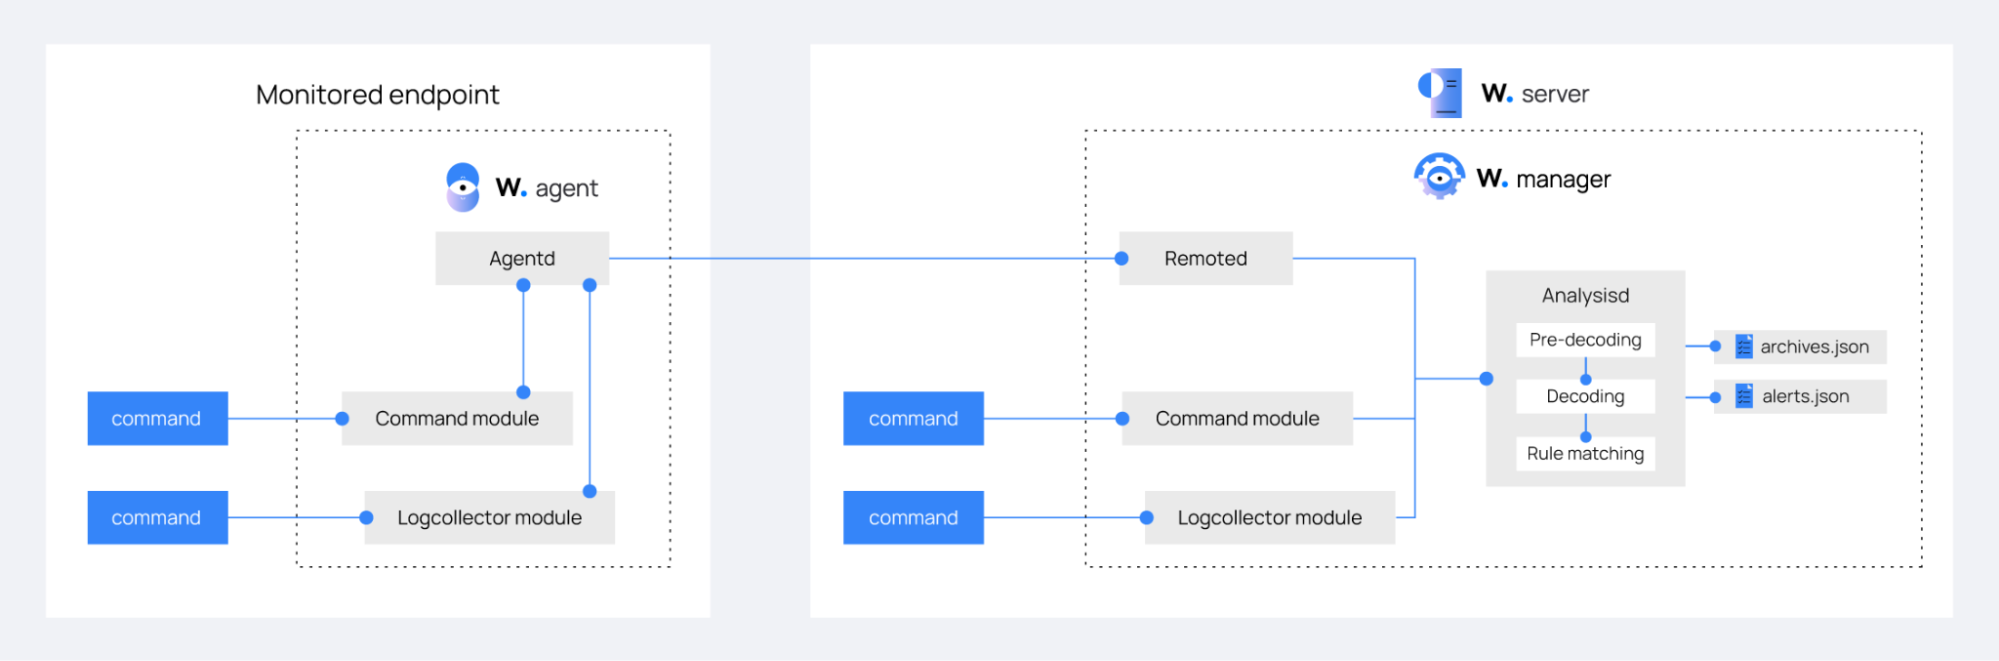 Command monitoring workflow